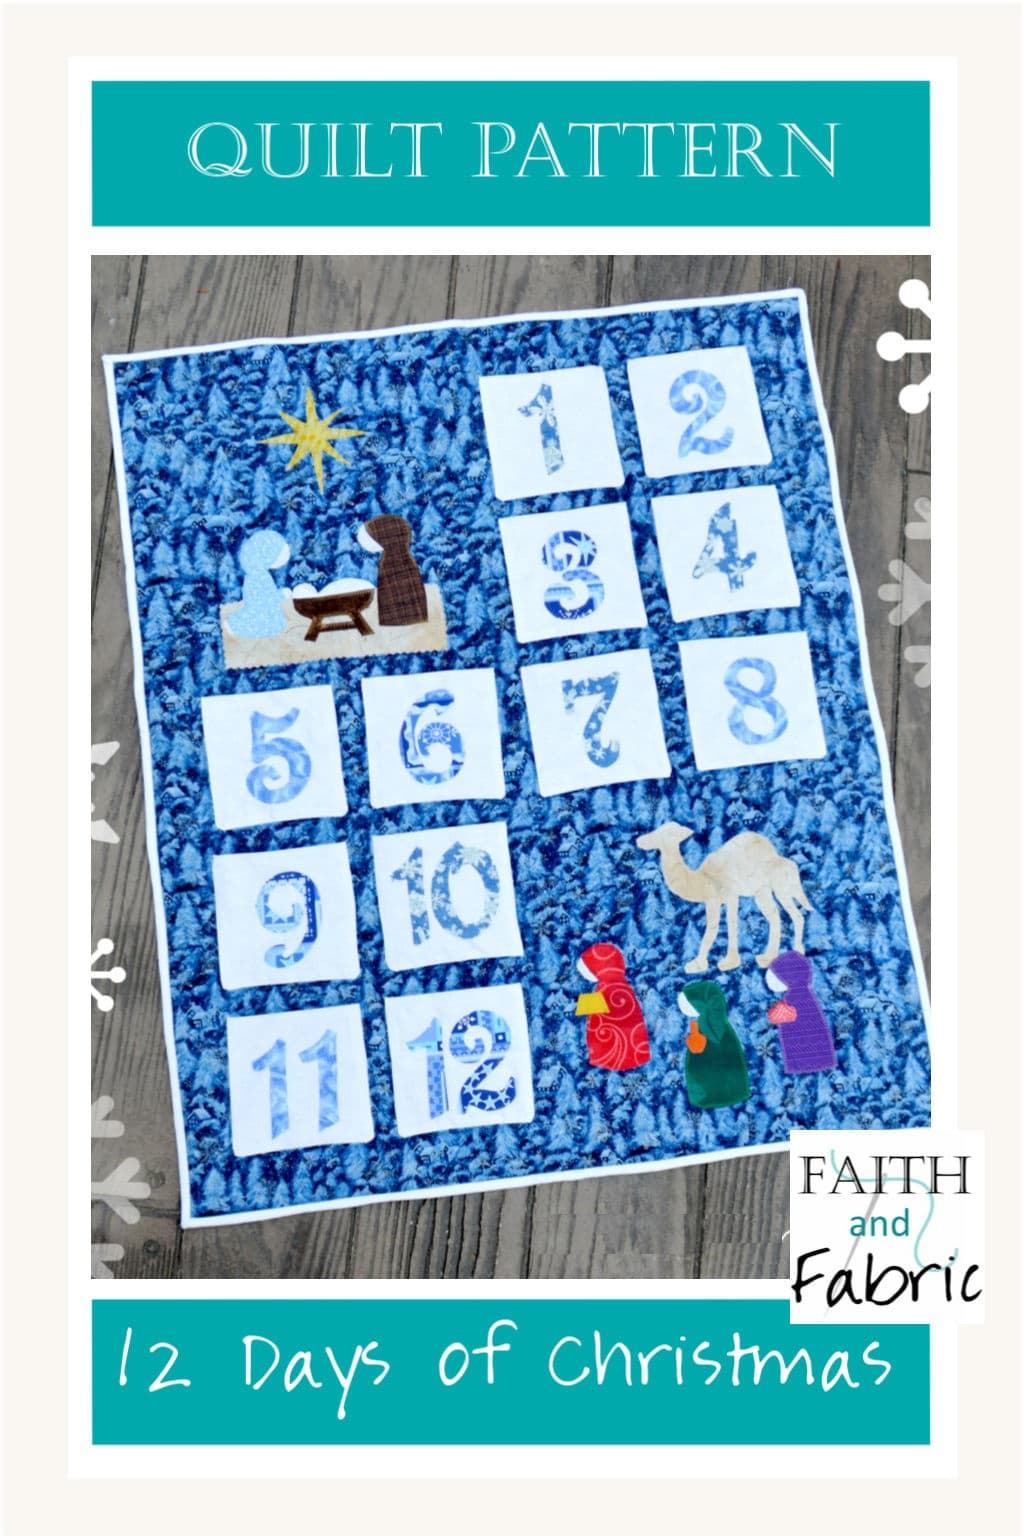 This interactive quilt creates twelve pockets, ready to be filled with sweet treats during the 12 Days of Christmas! Created by Faith and Fabric.